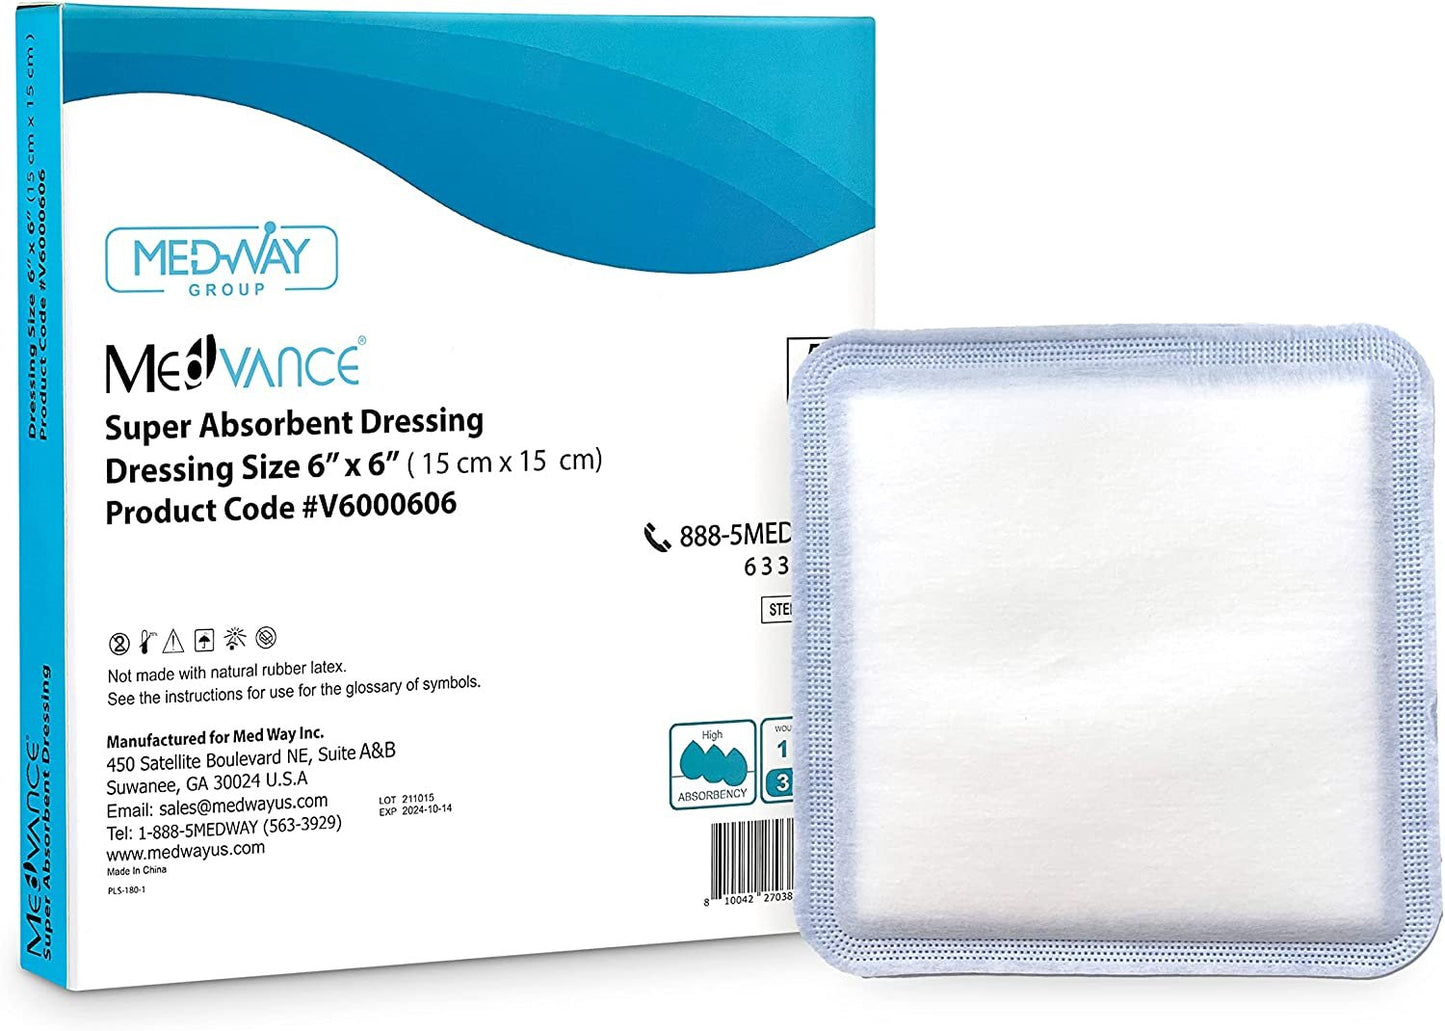 MedVance Super Absorbent Non-Adhesive Wound Dressing, 6"x6", Single Piece